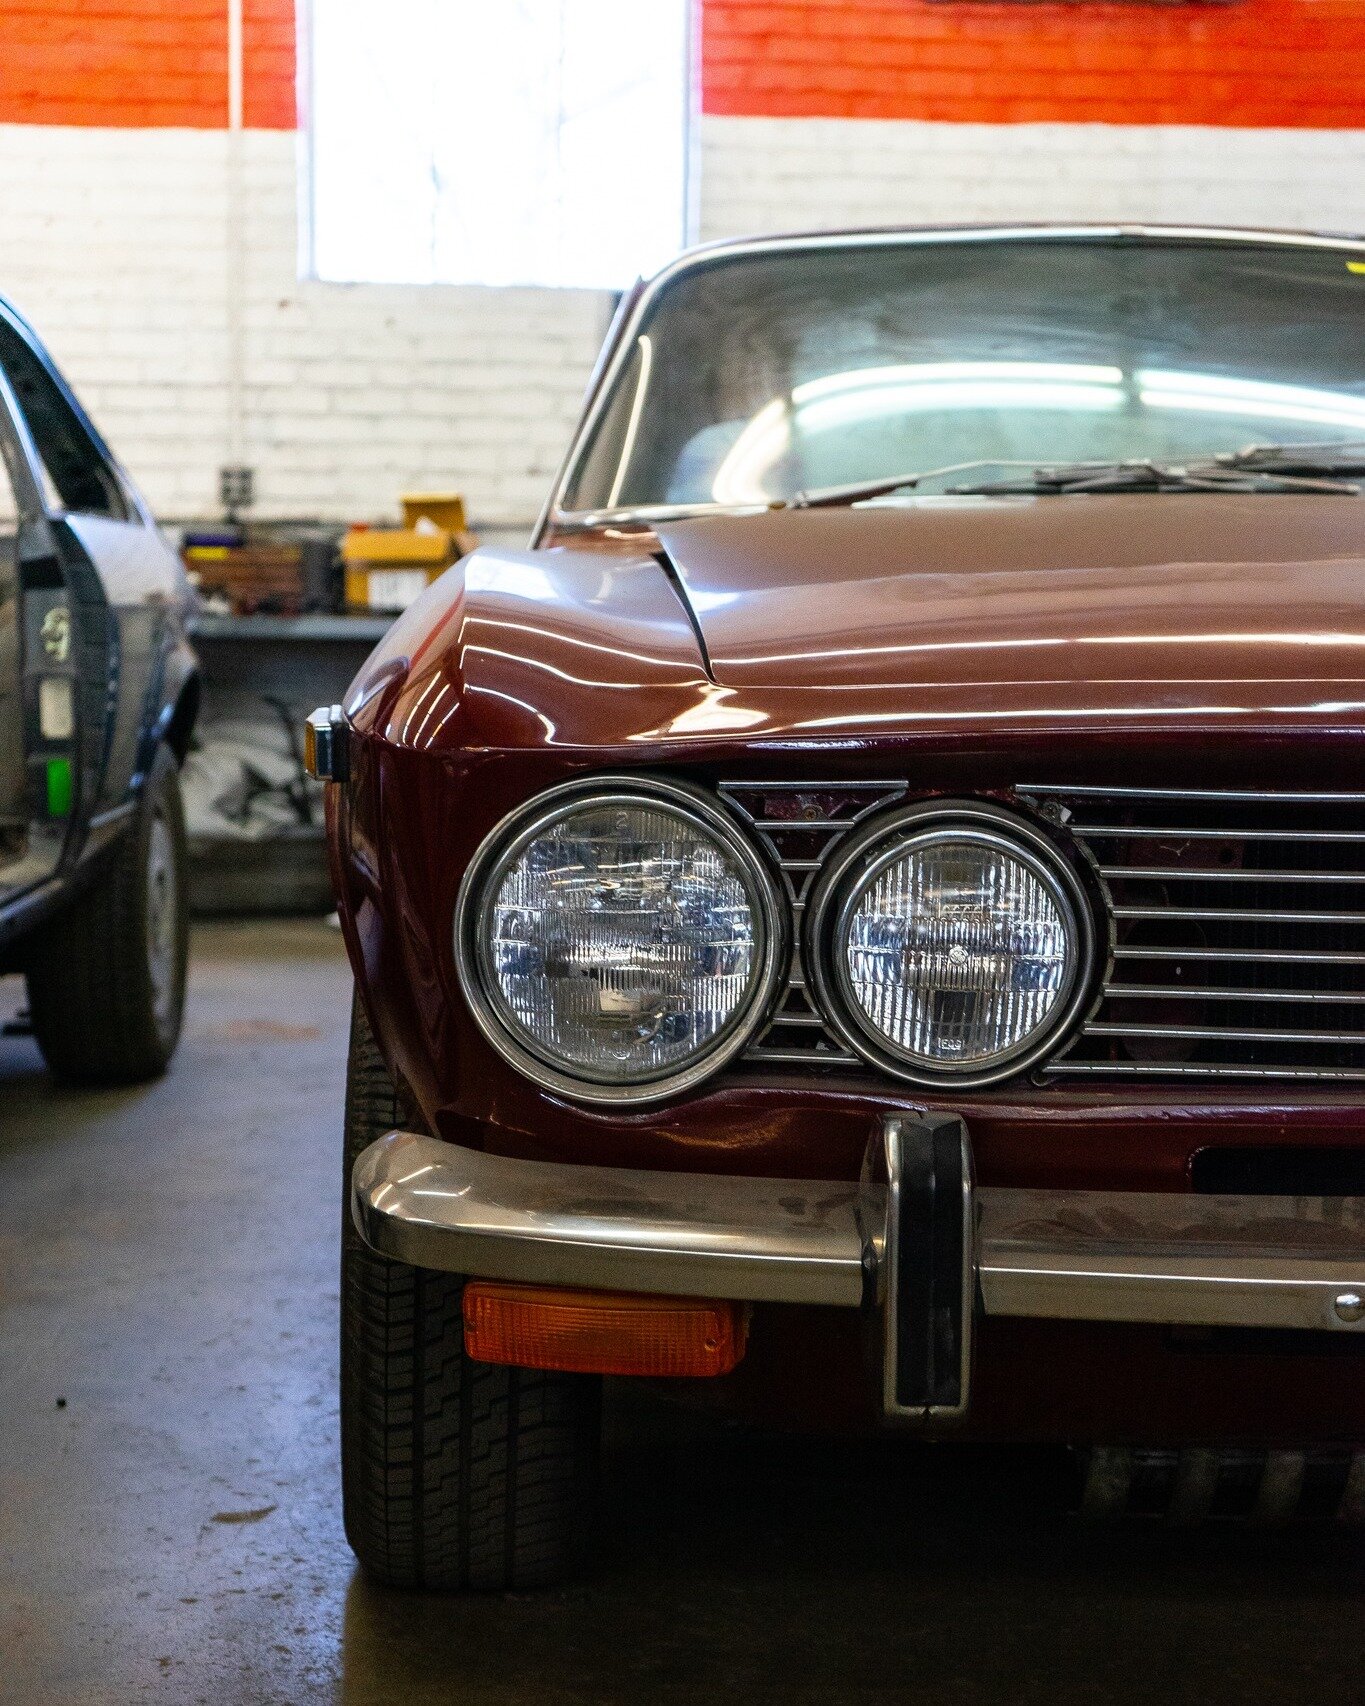 This GTV is almost done with its mechanical overhaul.
Follow for more content.
 #italian #driveclassics #carrestorationshop #carrestoration #alfaromeo #vintagecustoms #alfa105gtv #gtv #GTV #classicalfa #classicafla #ItalianCars #tacomawashington